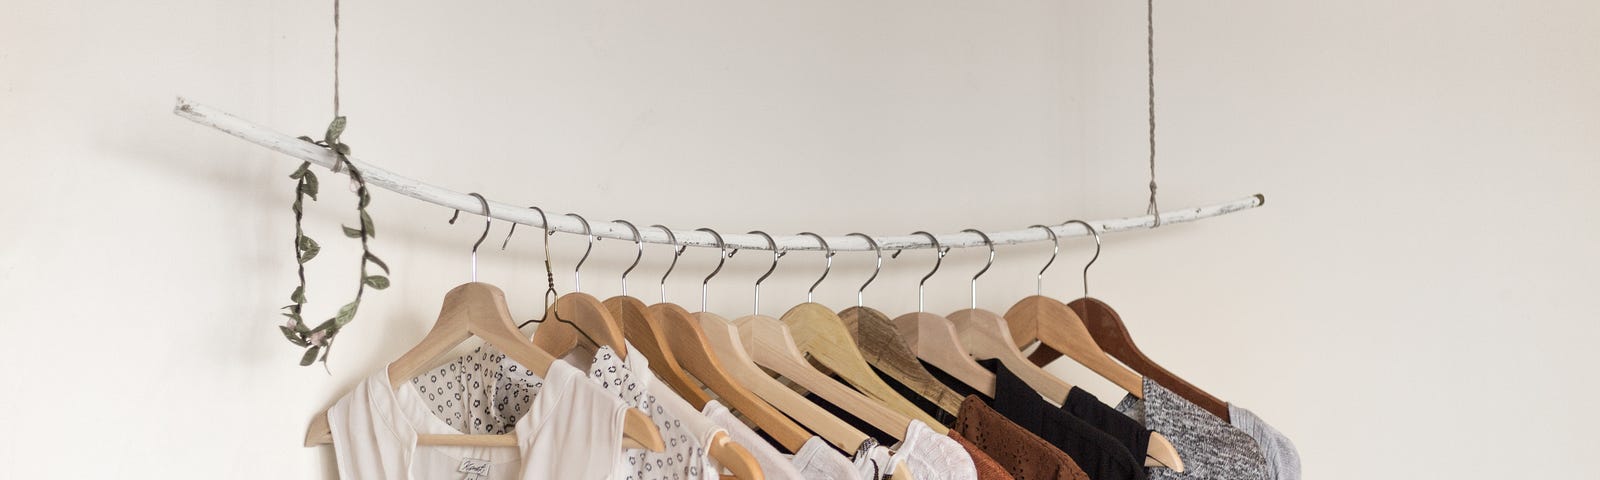 Minimalist clothing rack organized by color